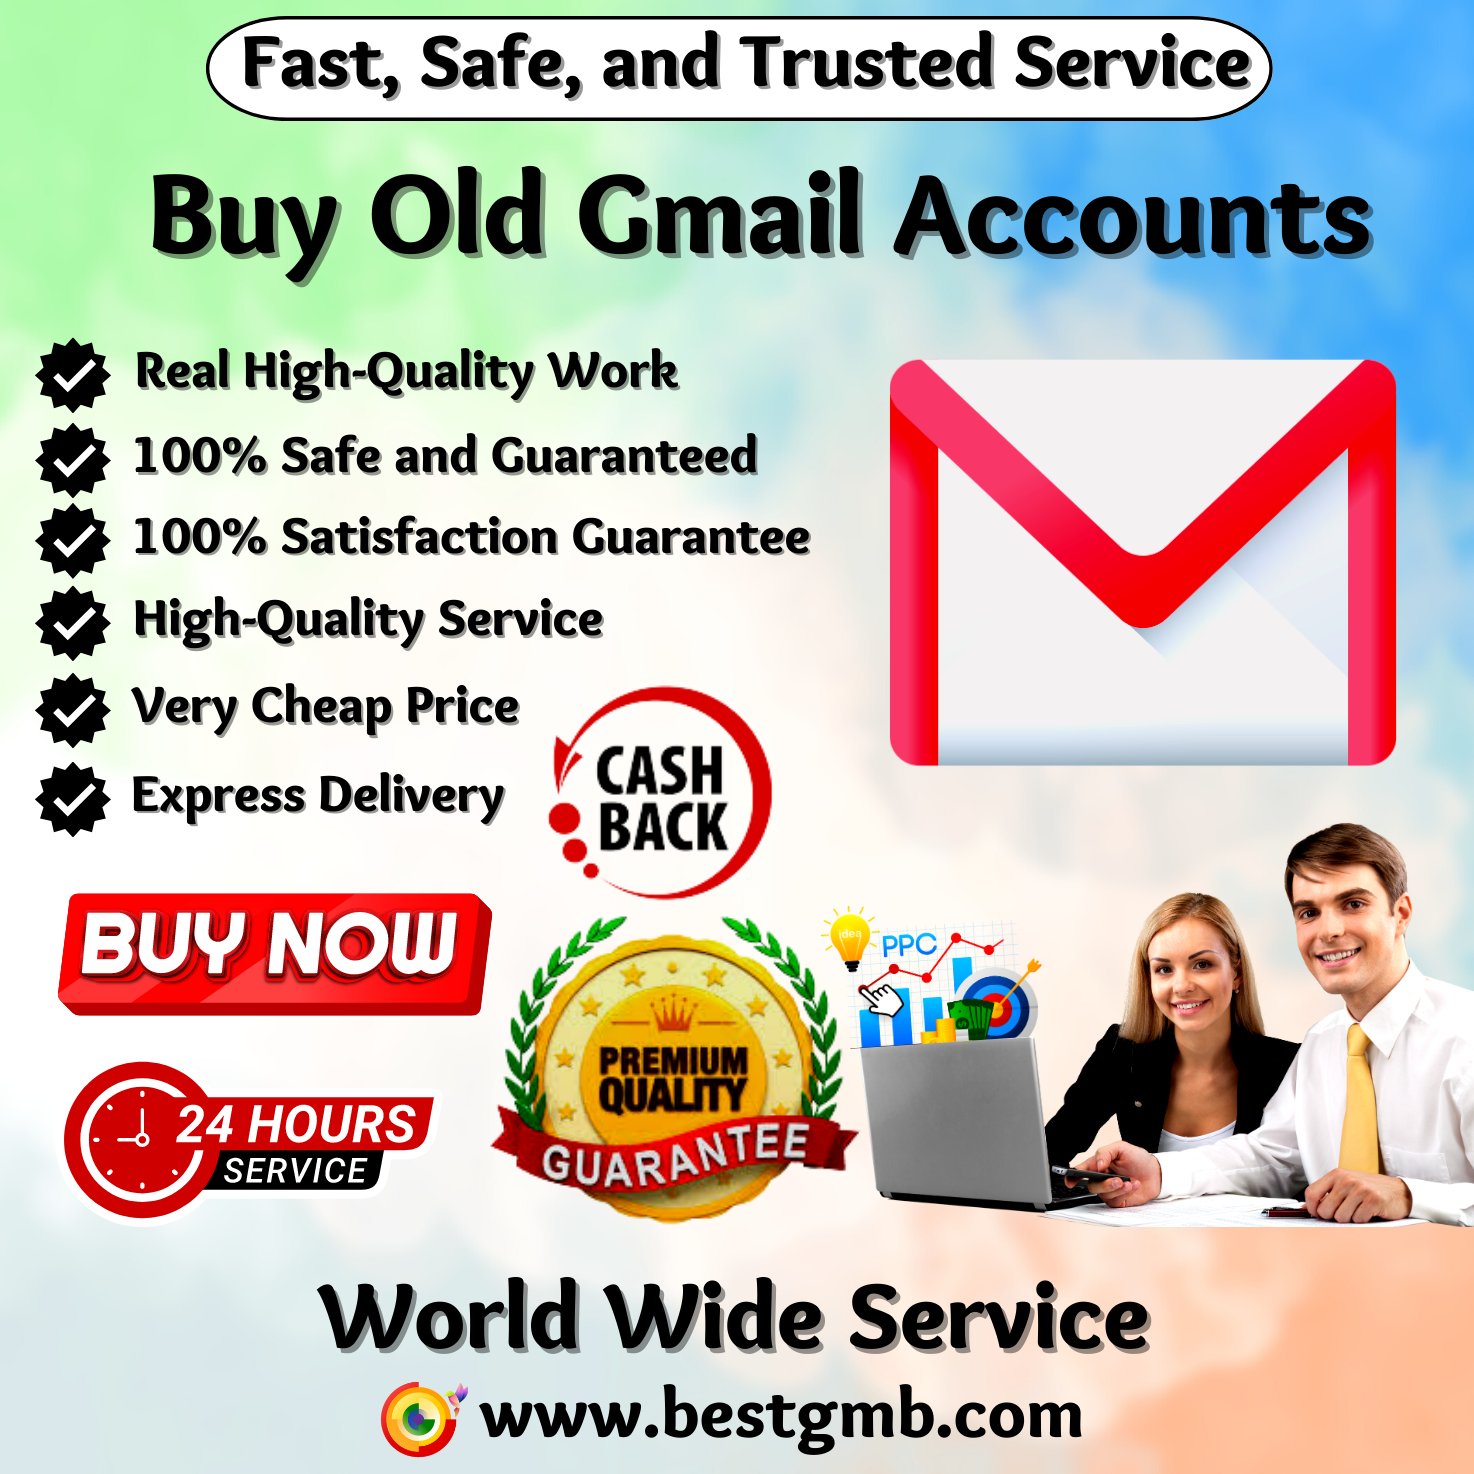 Buy Old Gmail Accounts - Old, Aged, Very Low Price